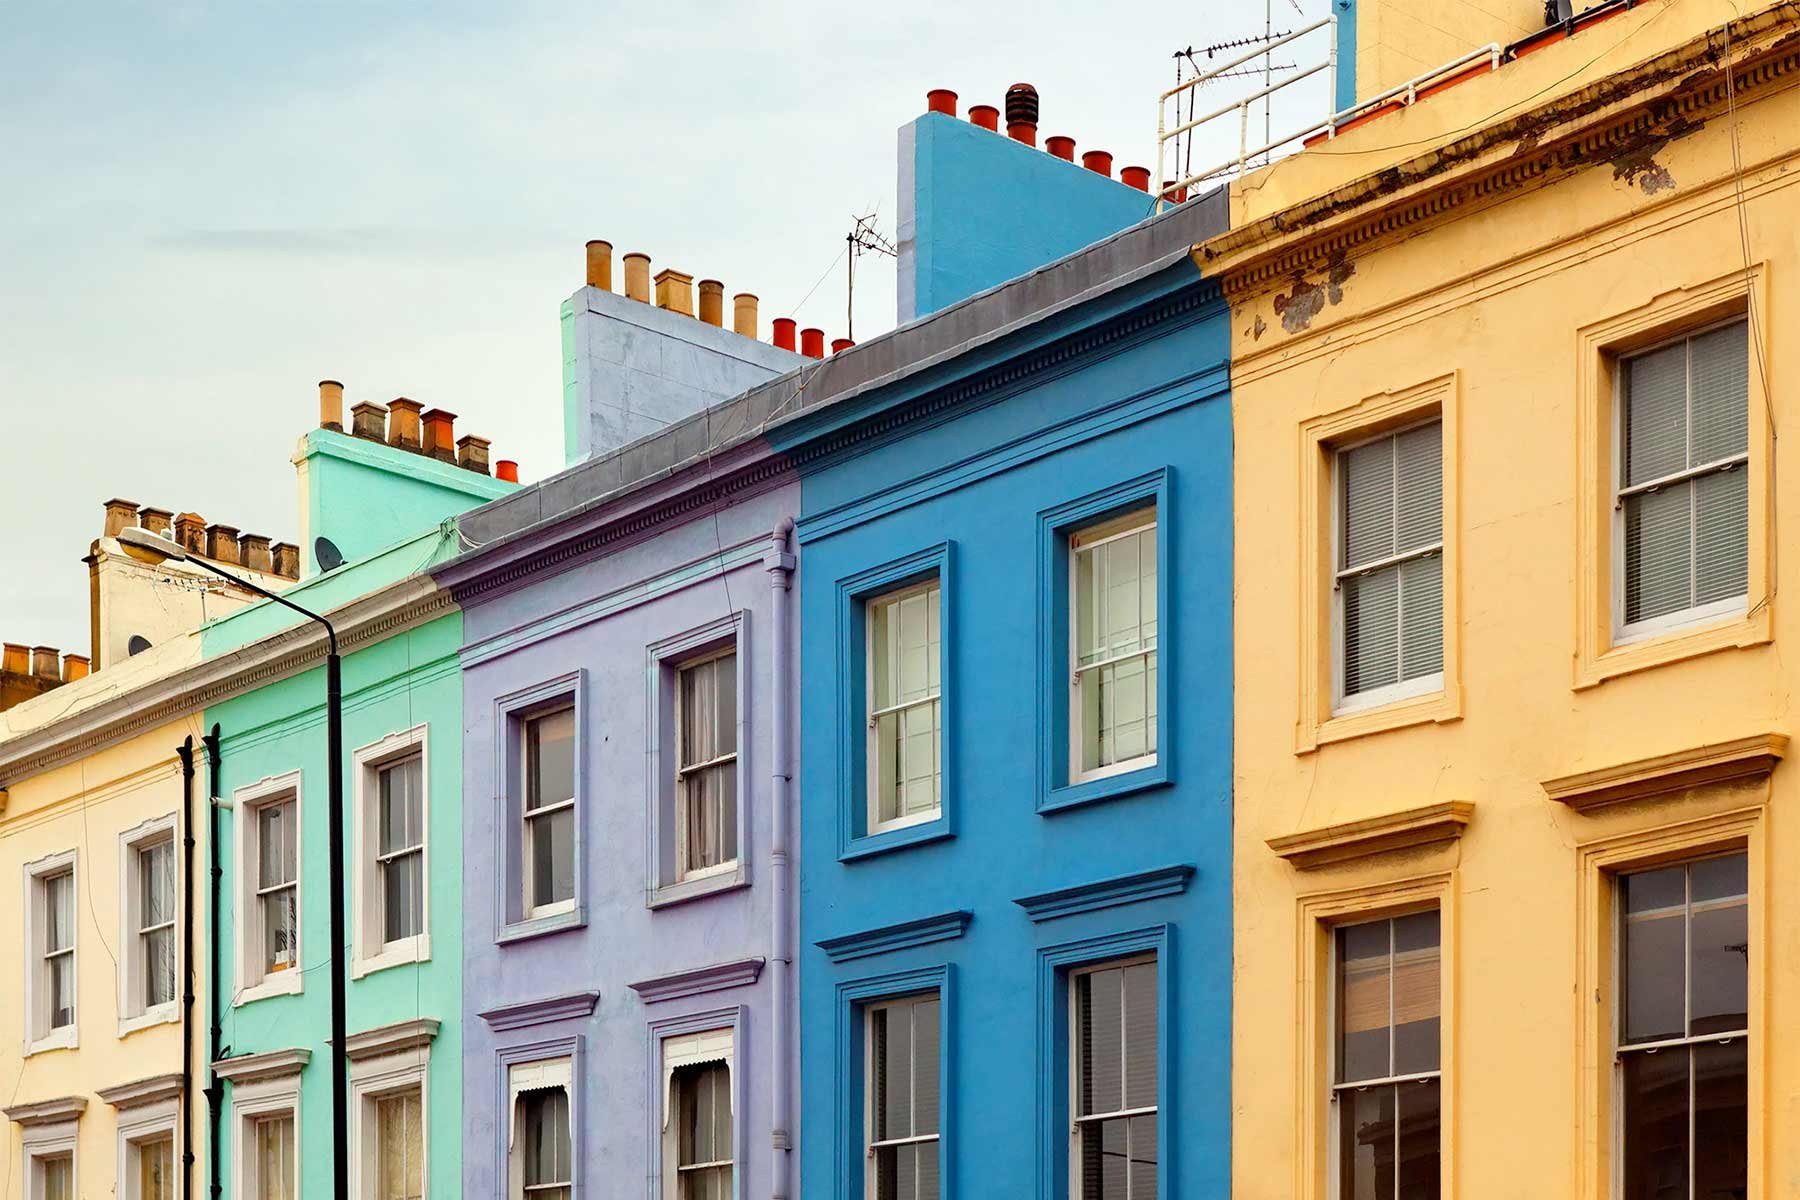 Houses in London